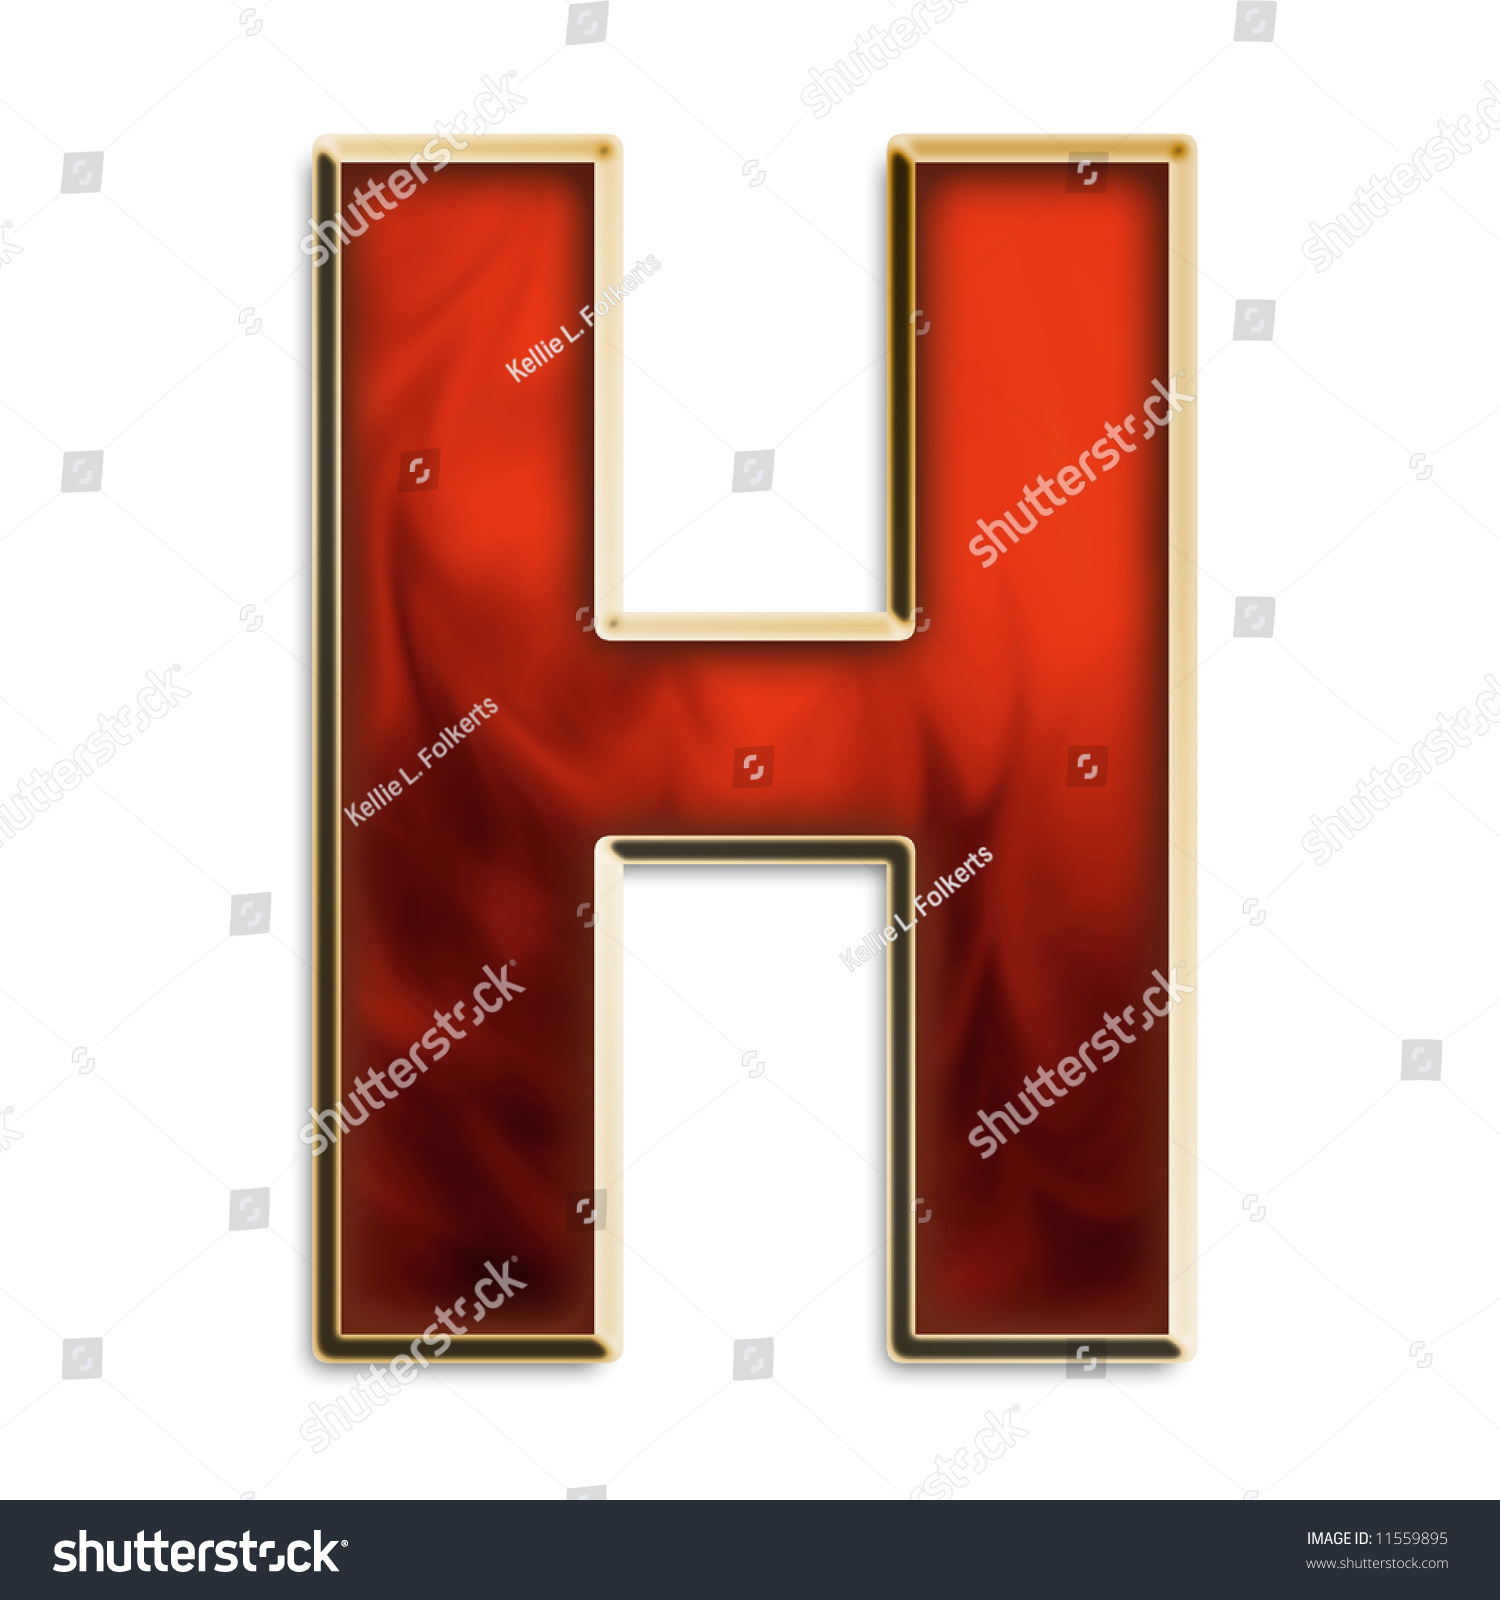 Capital H In Fiery Red & Gold Isolated On White Stock Photo 11559895 ...